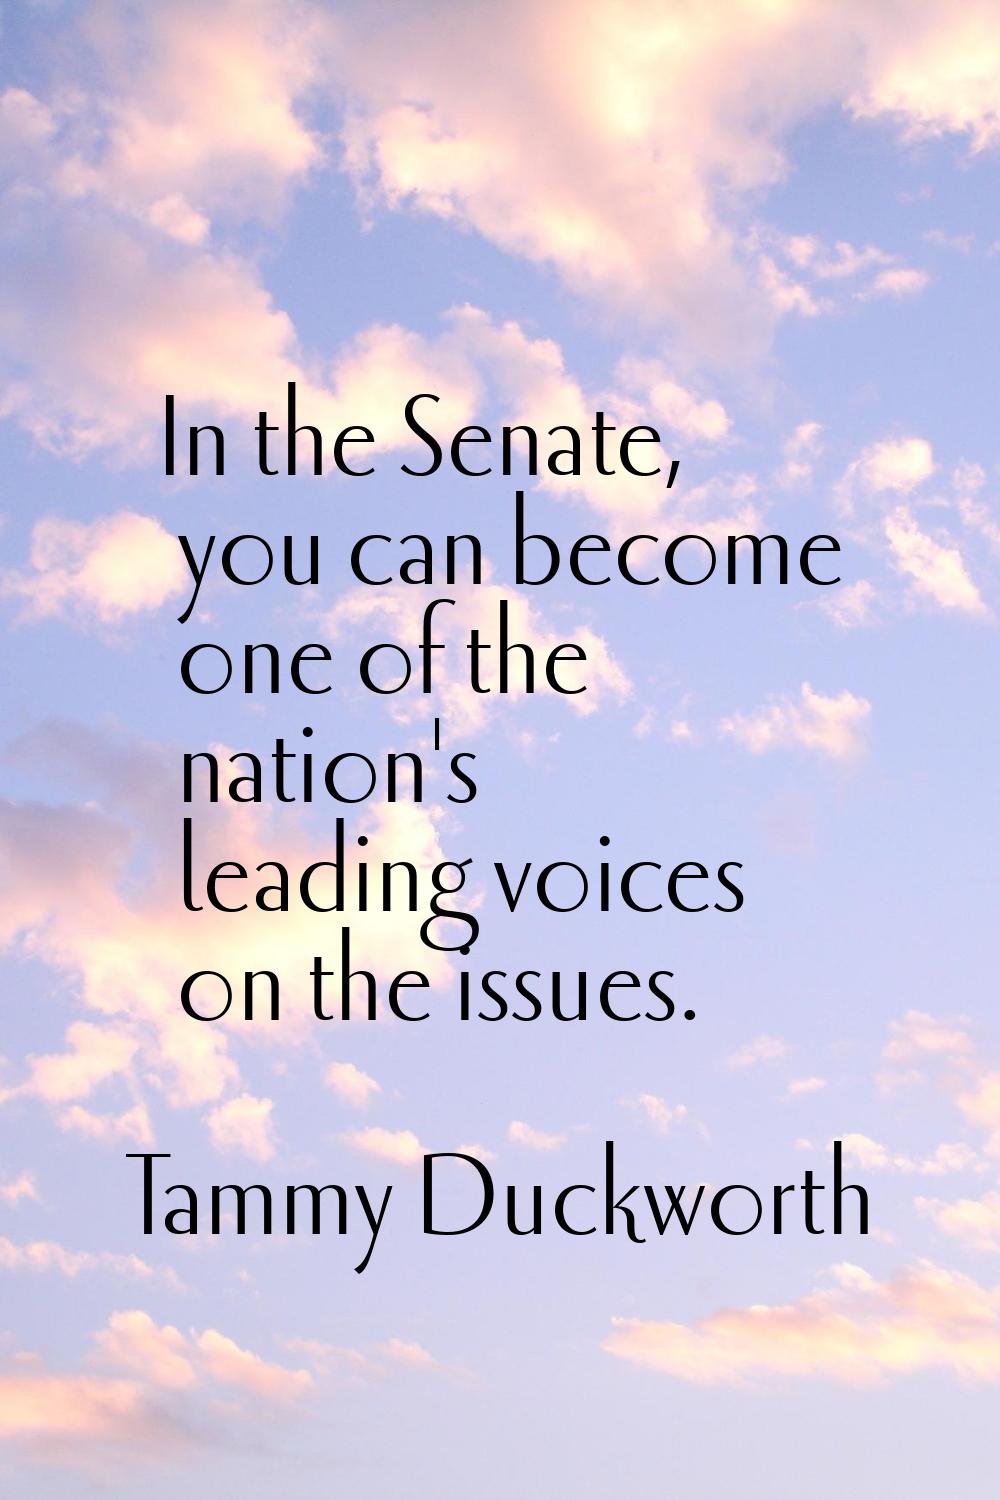 In the Senate, you can become one of the nation's leading voices on the issues.